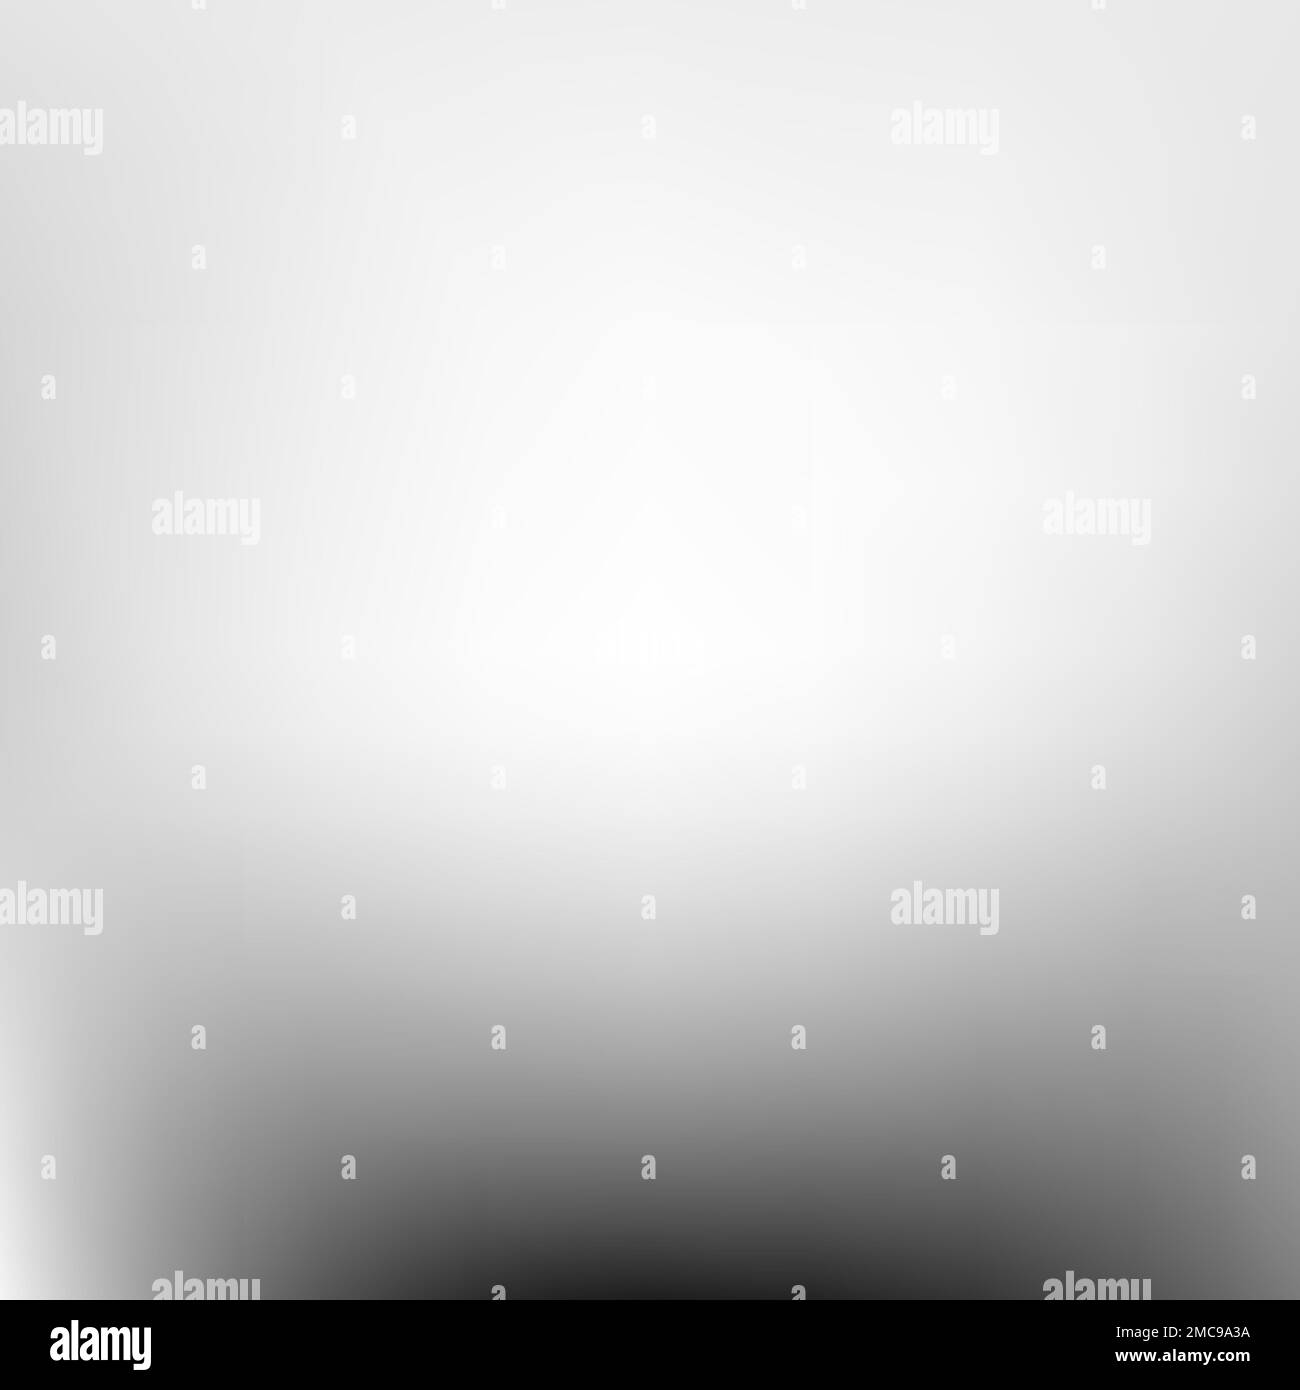 Blur background Black and White Stock Photos & Images - Alamy